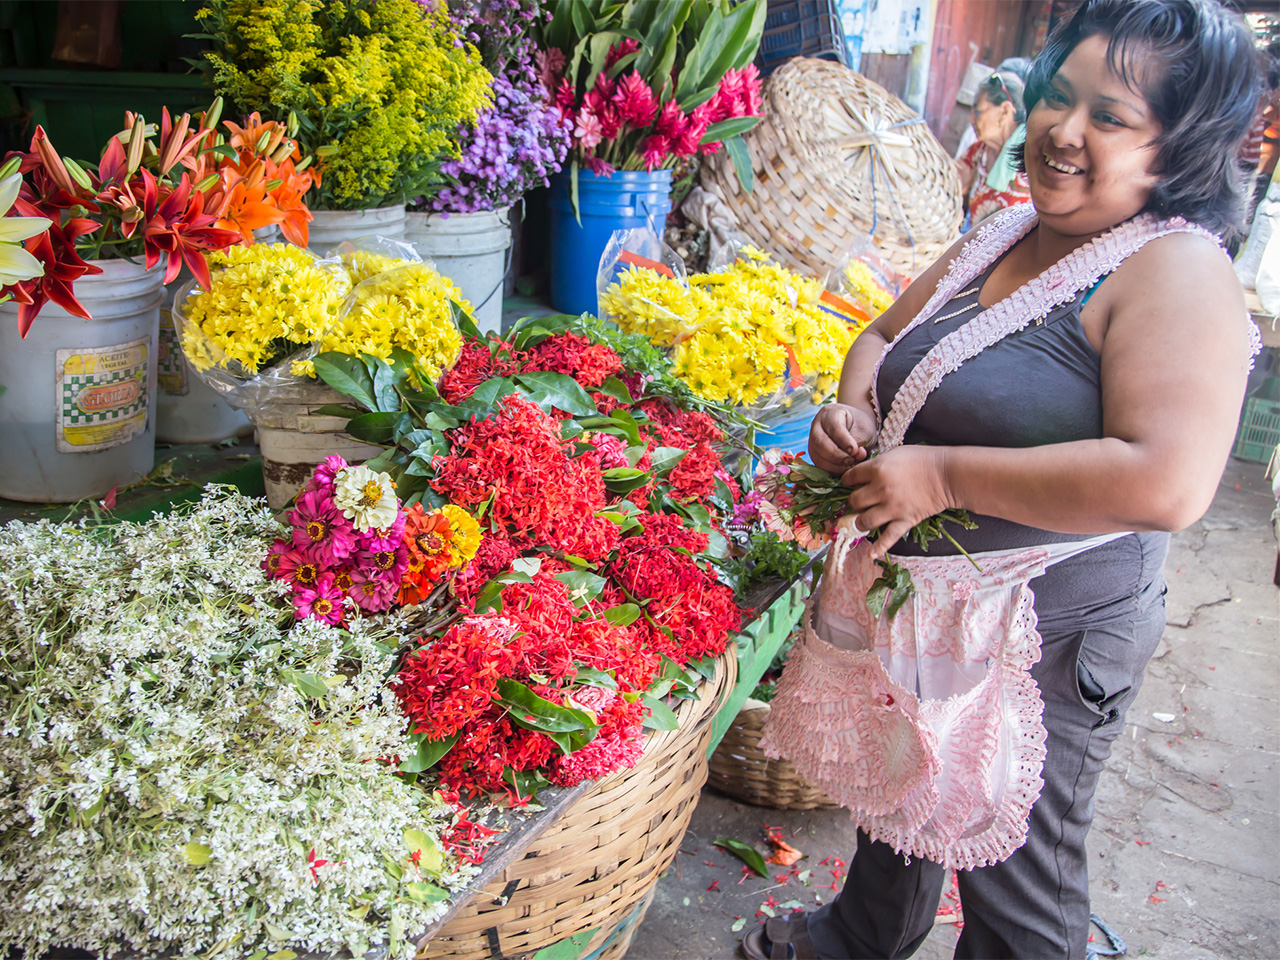 A woman shops for flowers at an open-air market stall in Granada, Nicaragua.